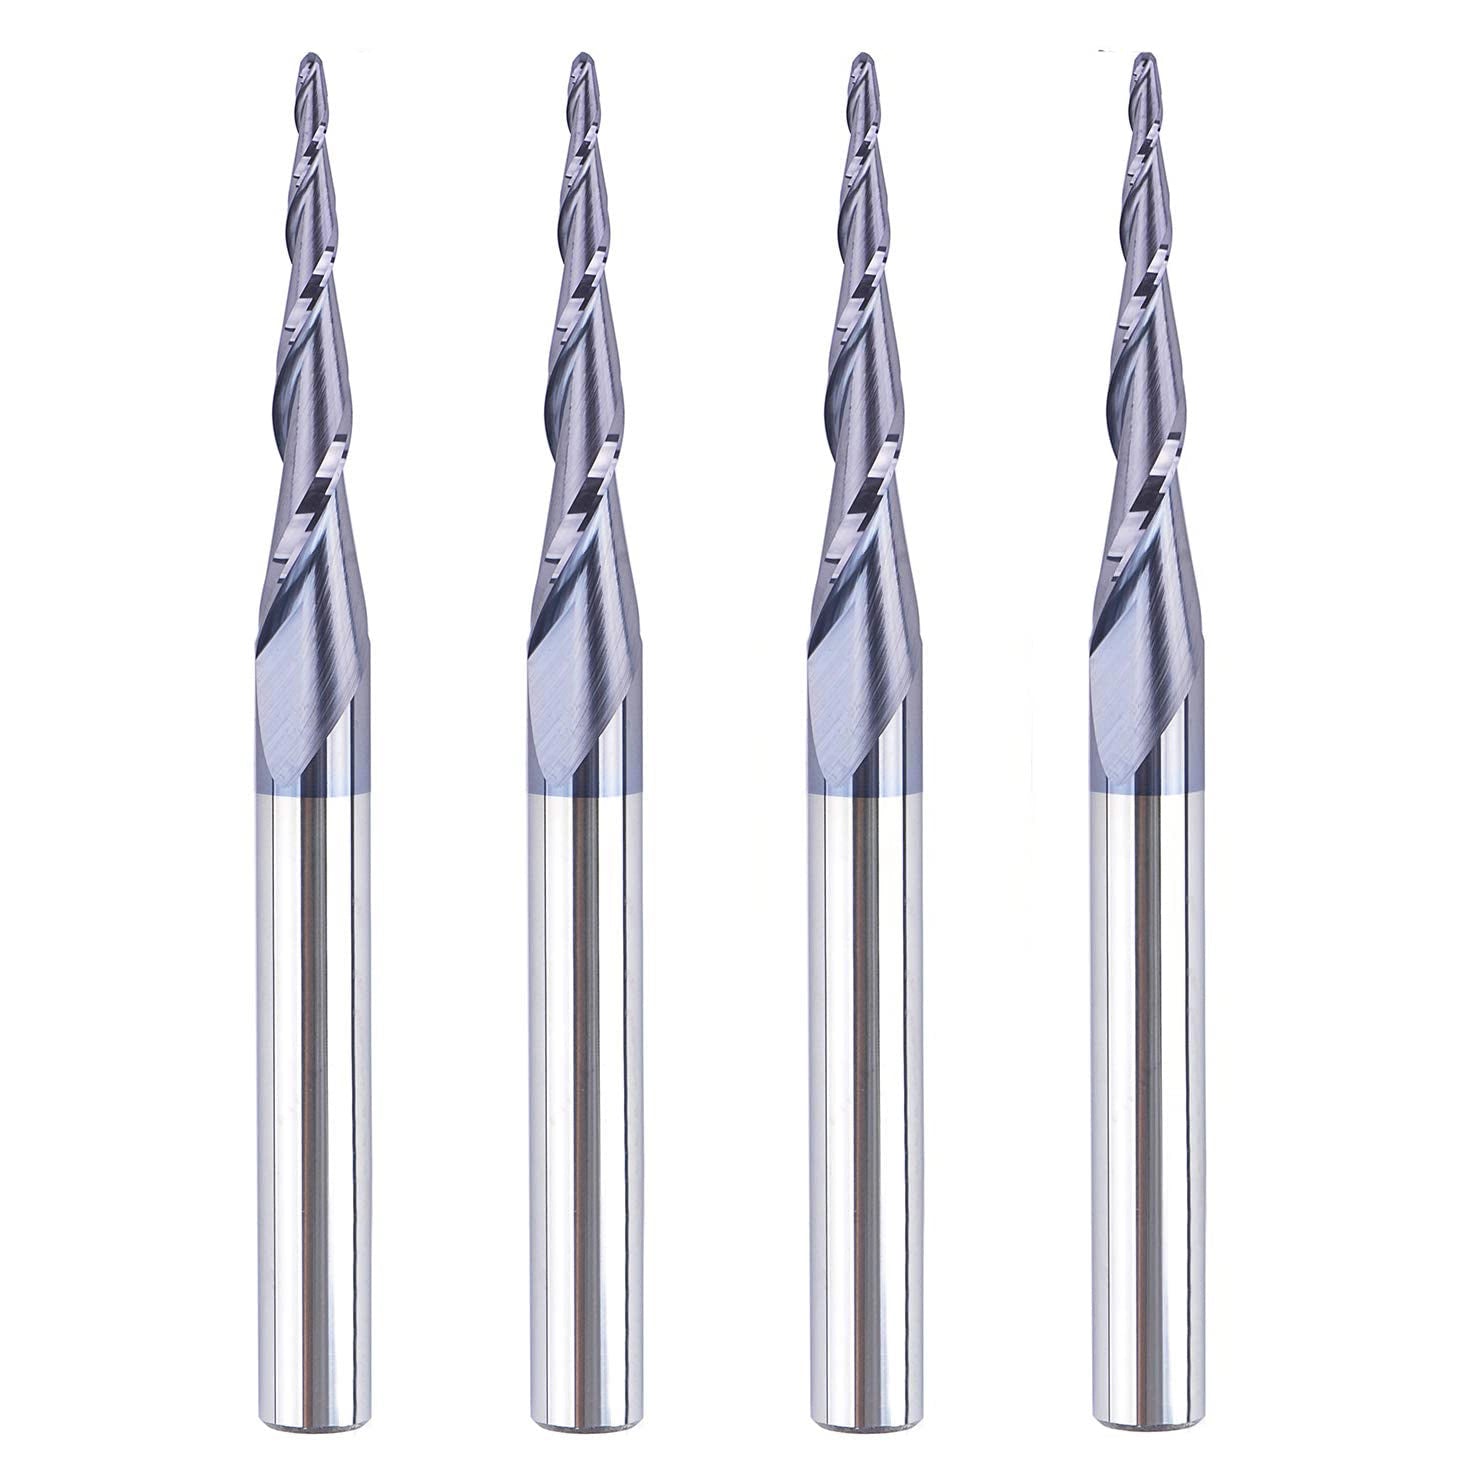 SpeTool W01008 CNC 2D and 3D Carving 4.36 Deg Tapered Angle Ball Nose 0.75mm Radius x 1/4" Shank x 1-1/4" Cutting Length x 3" Long 2 Flute SC TiAlN Coated Upcut Router Bit